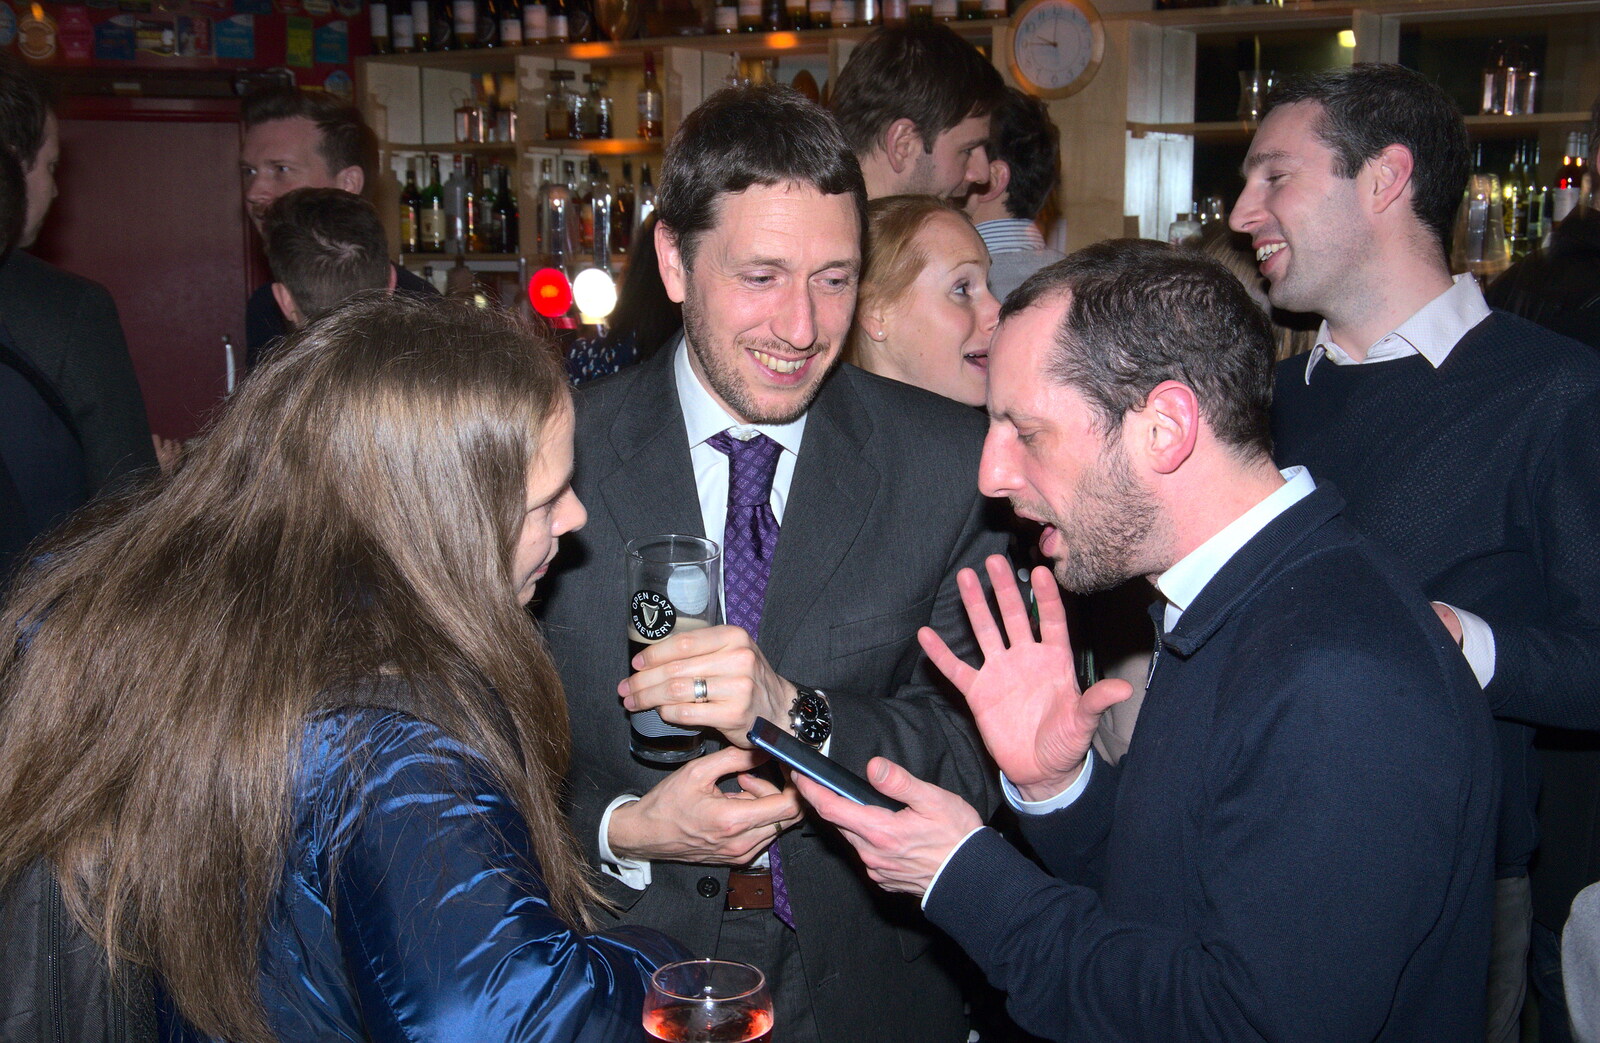 More conversation in an over-crowded bar from SwiftKey's Ten Year Anniversary Reunion, Selwyn College, Cambridge - 11th January 2019